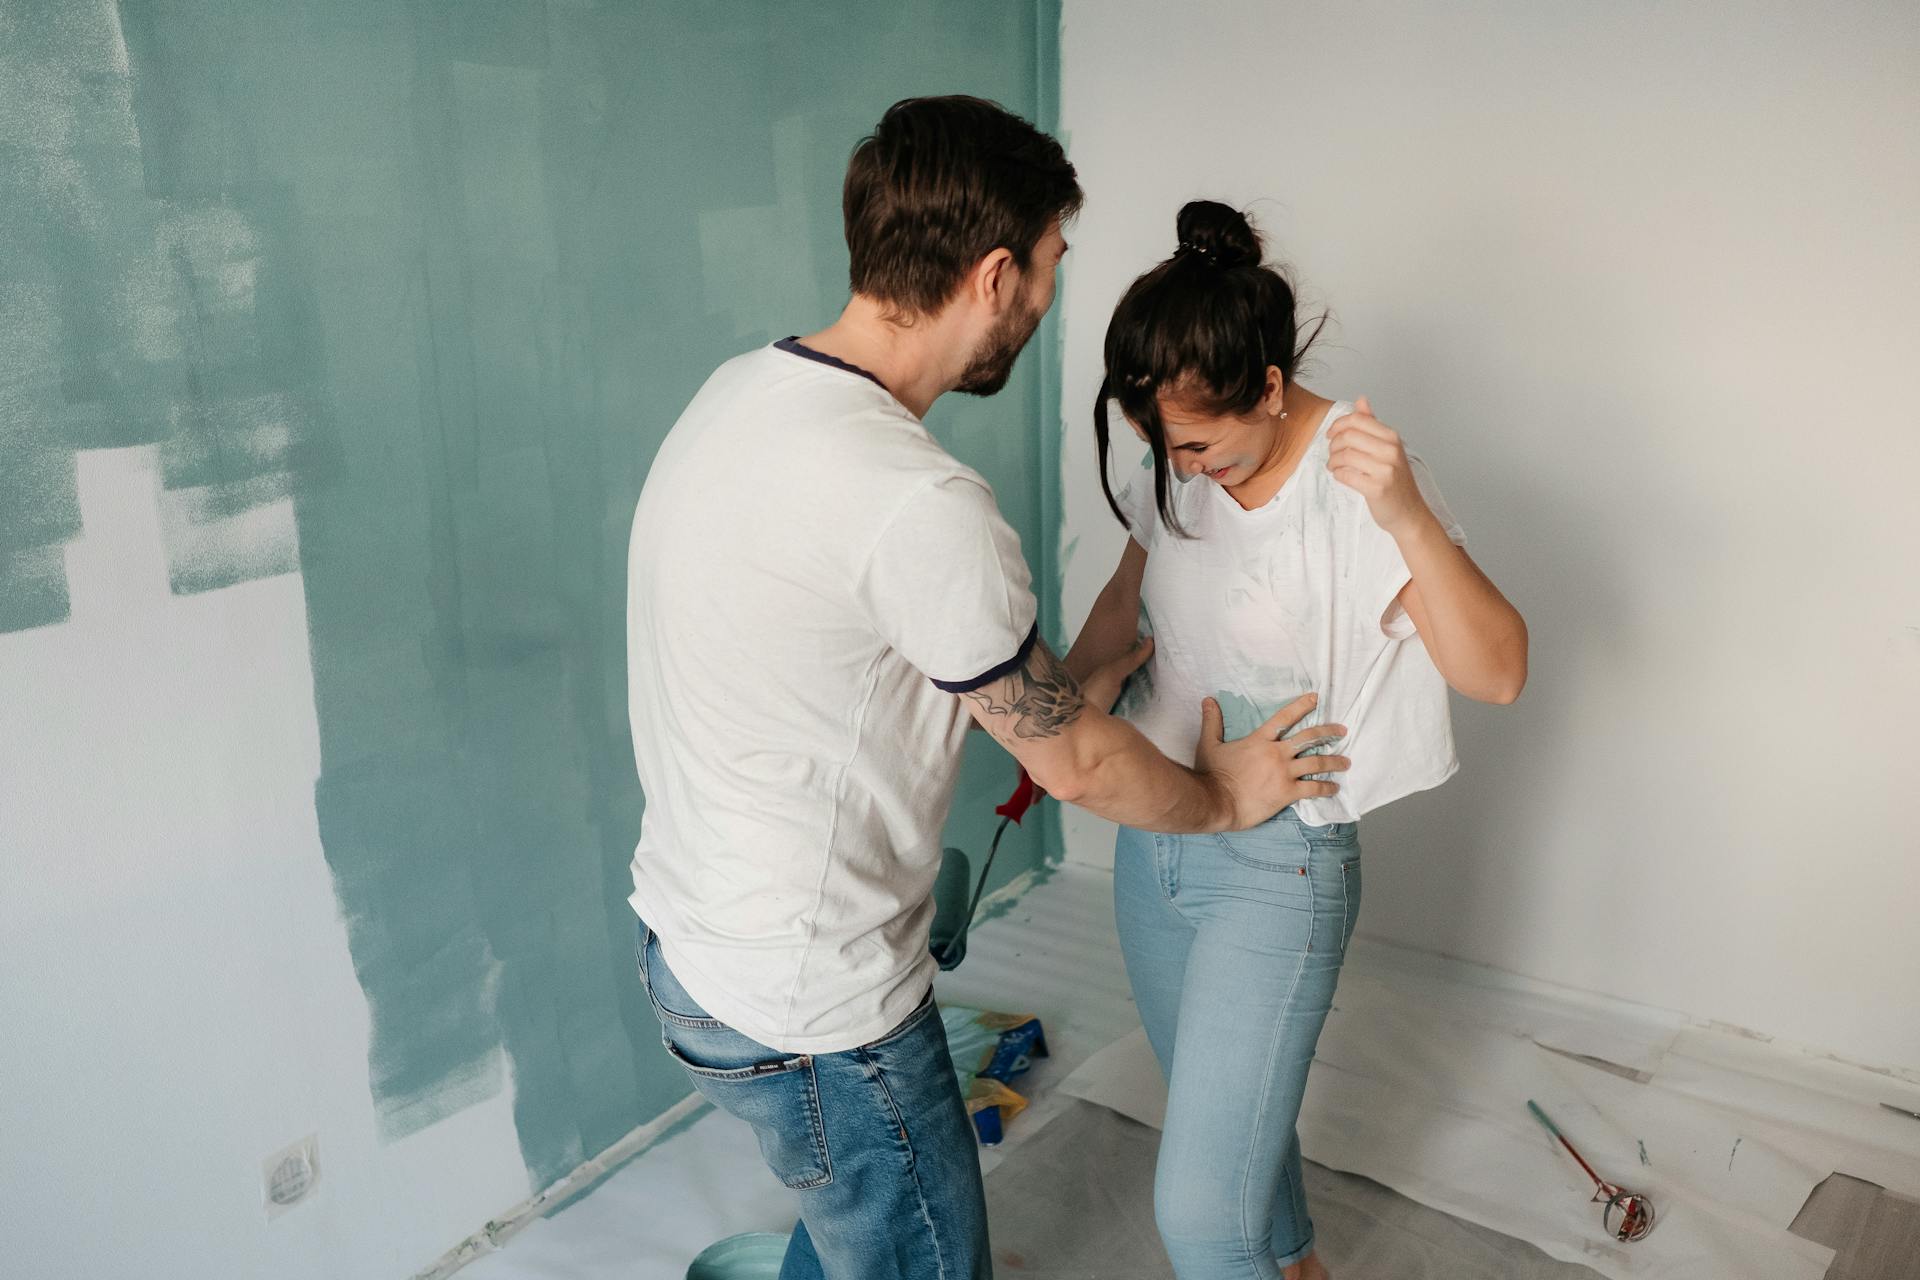 A couple playfully doing home improvements | Source: Pexels